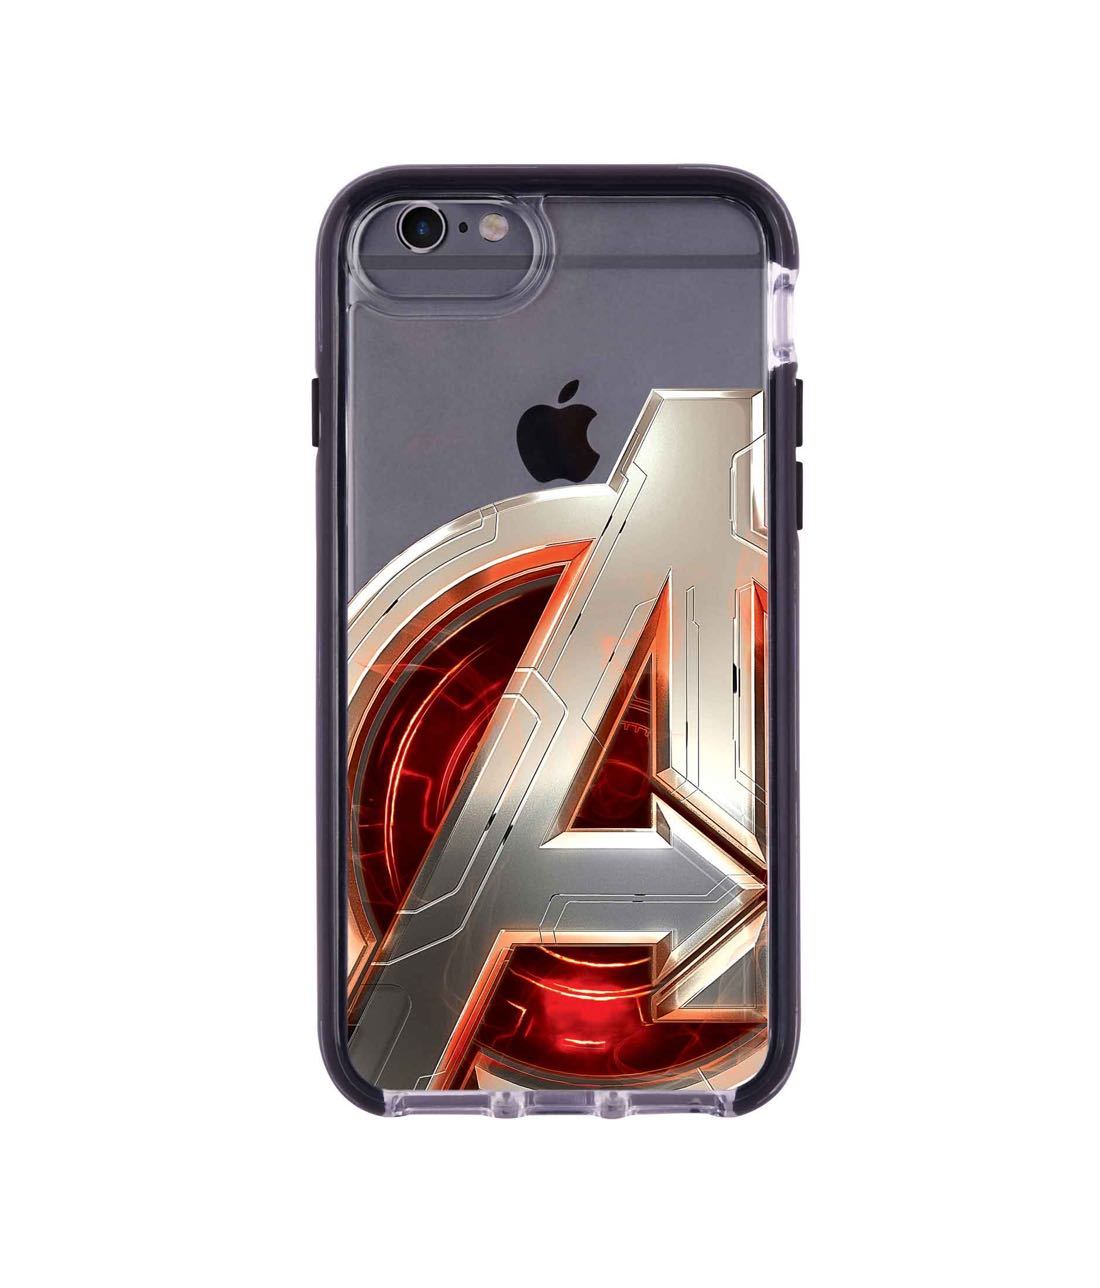 Avengers Version 2 - Extreme Phone Case for iPhone 6 Plus